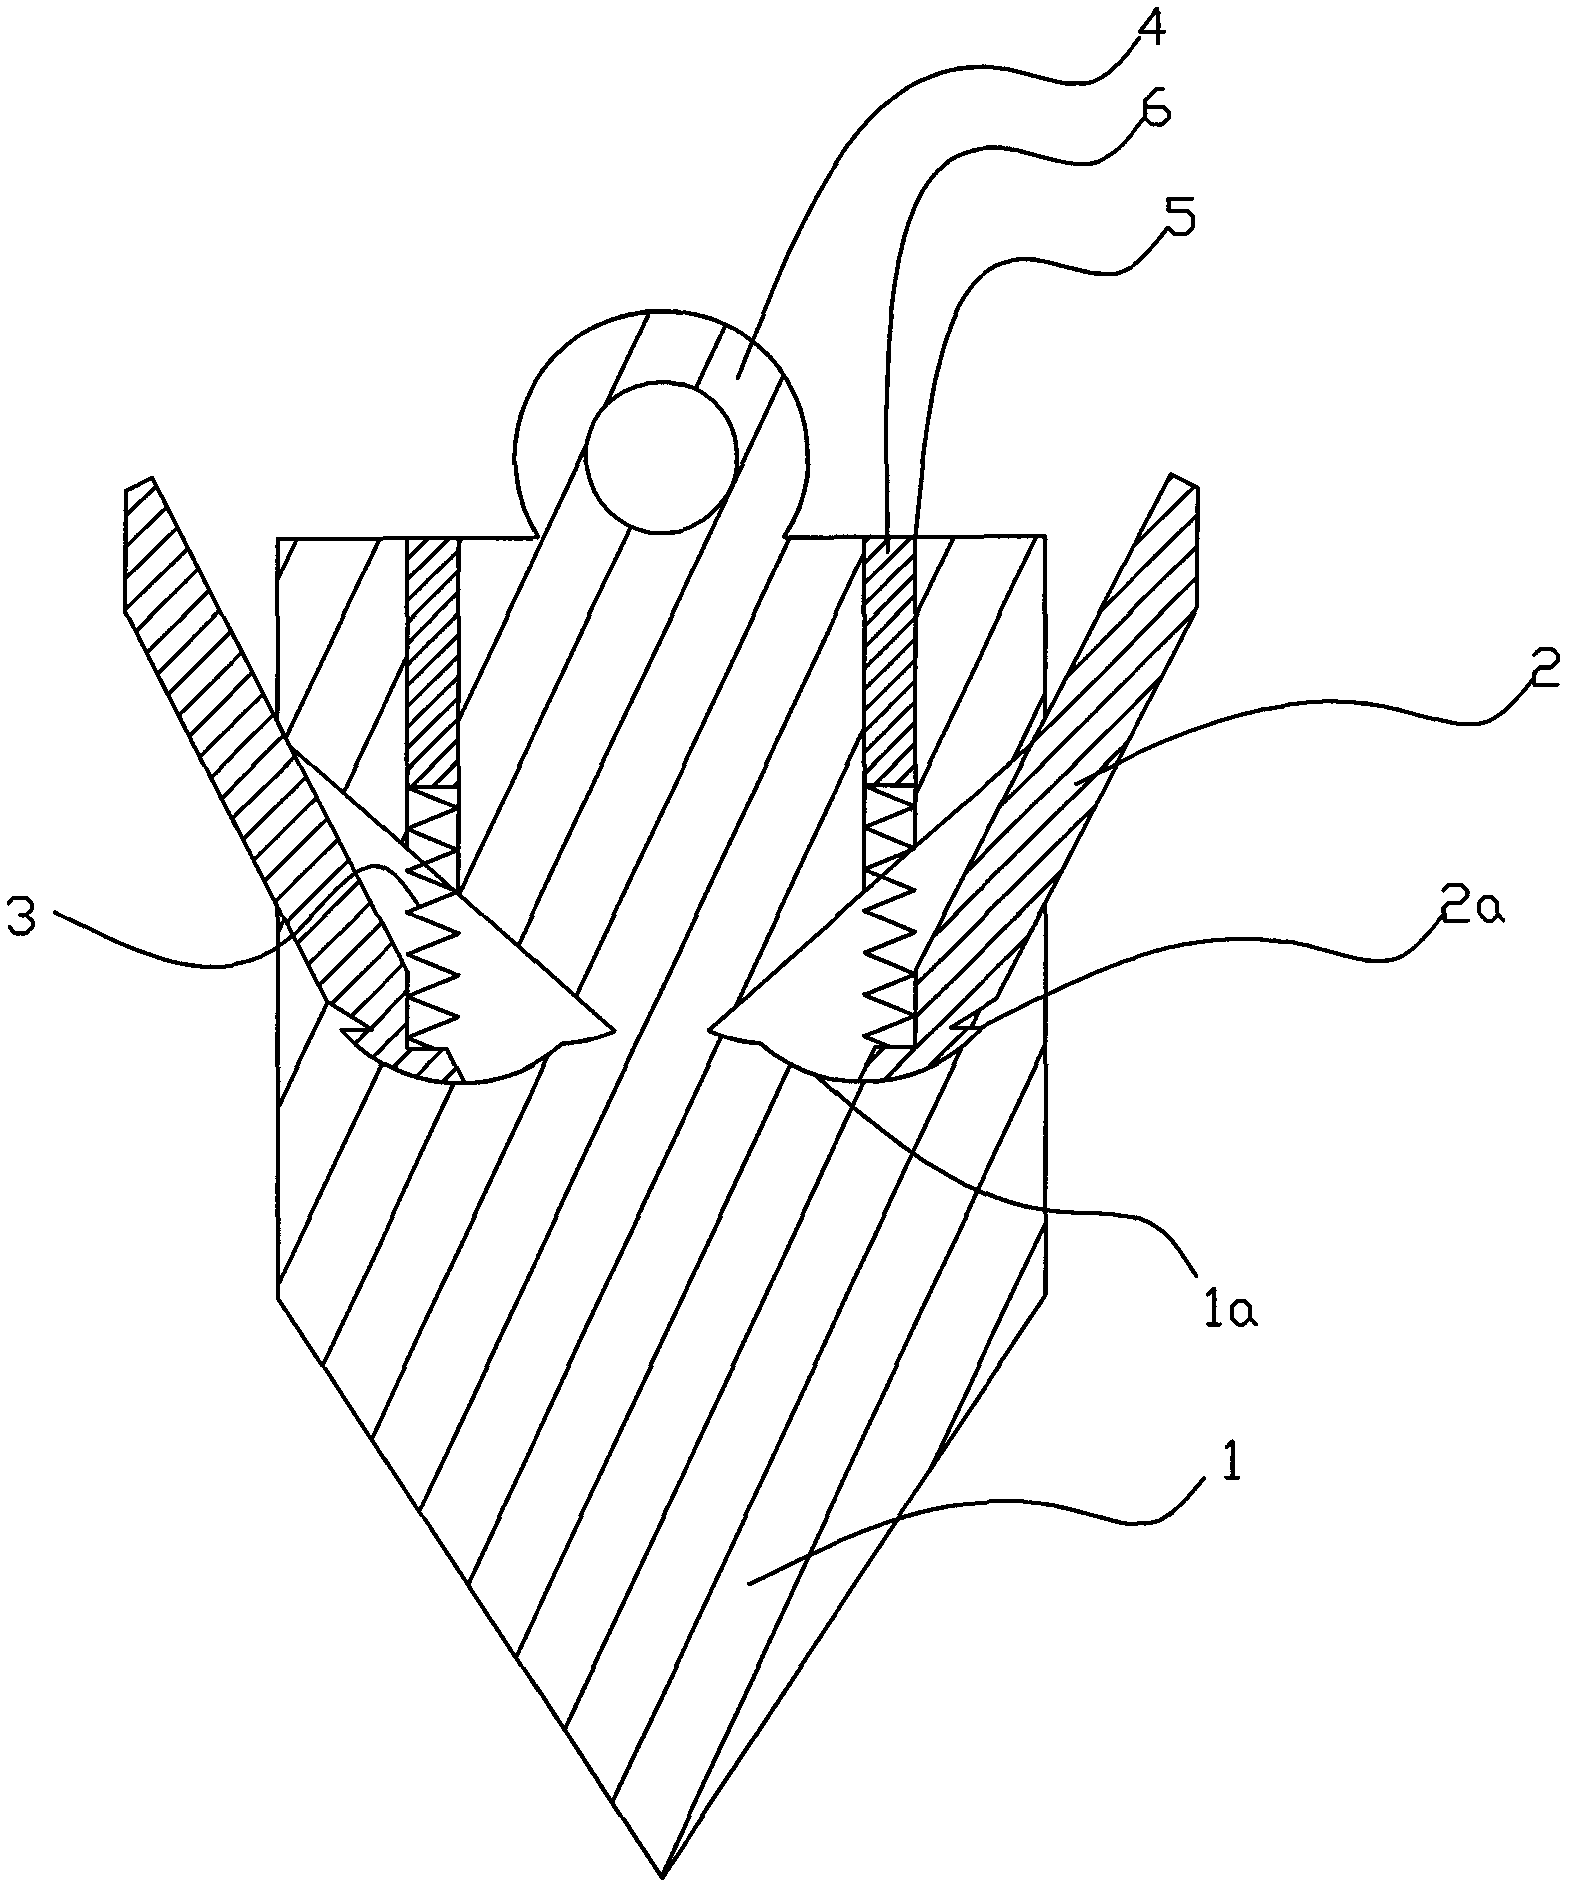 Self-sinking suction anchor